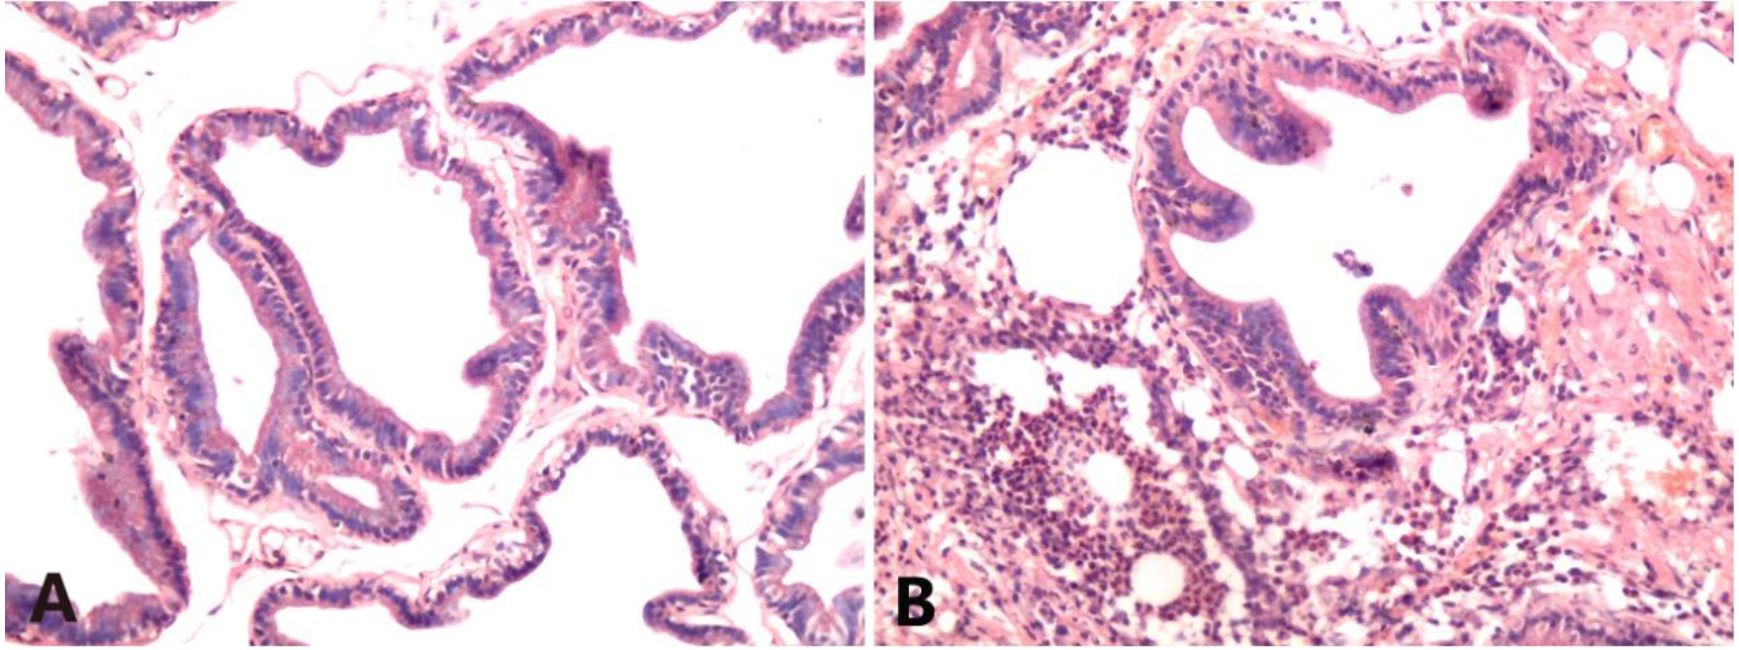 HE staining of rat prostate tissues (HE×200). A. Sham operation group: There was no vasodilation or vasocongestion, interstitial dilation or edema, and was devoid of any interstitial inflammatory cell infiltration; B. Modeling group after 7 d: There was severe vasodilation, and blood vessel burst was observed; Severe perivascular neutrophilic and lymphocytic infiltration was noted.